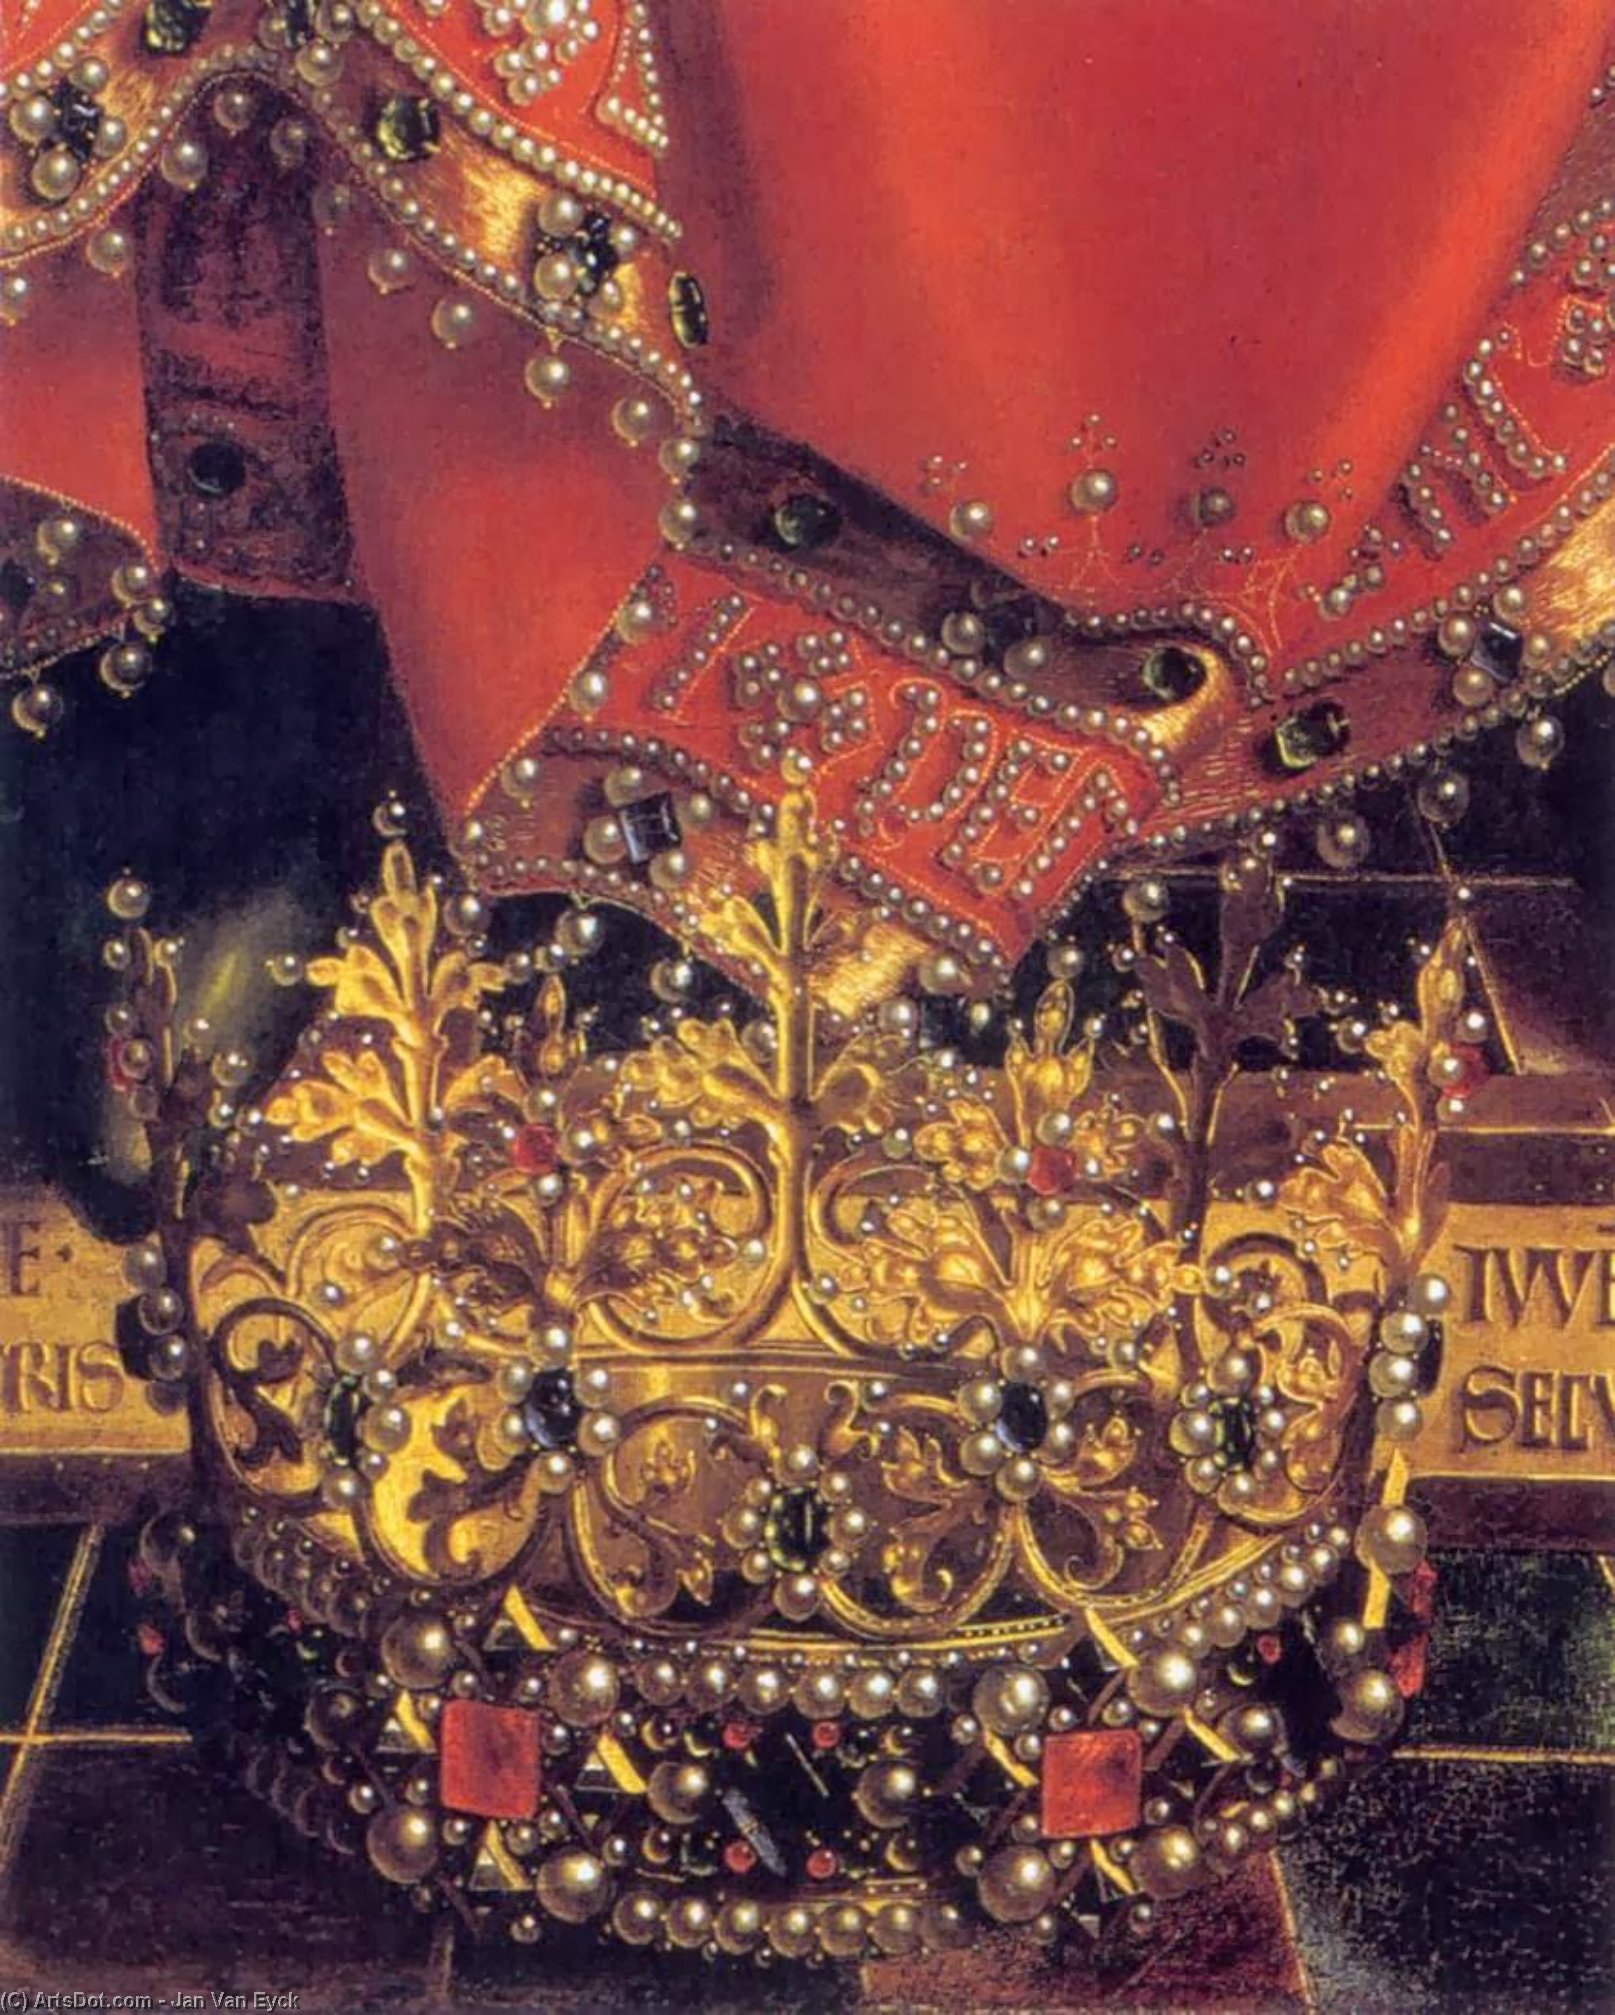 Order Paintings Reproductions The Ghent Altarpiece: God Almighty (detail), 1426 by Jan Van Eyck (1390-1441, Netherlands) | ArtsDot.com